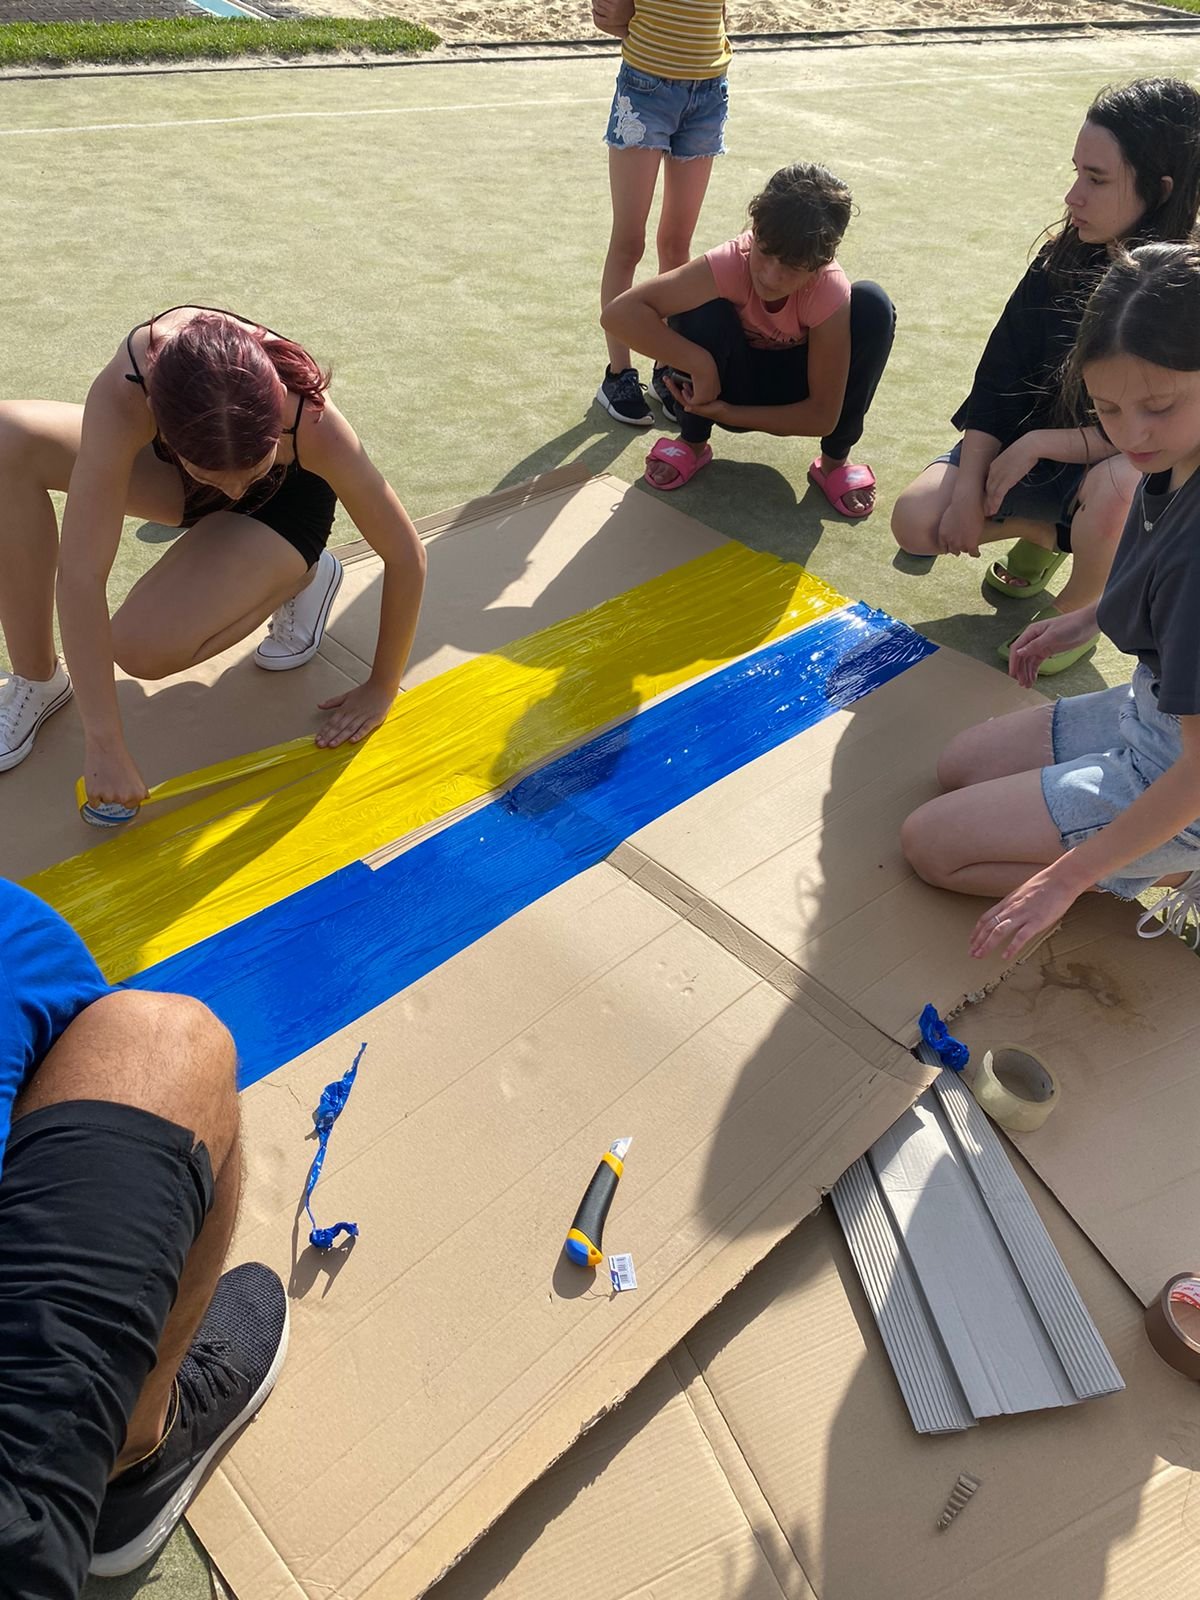 Campers prepare a Ukrainian themed crafts project